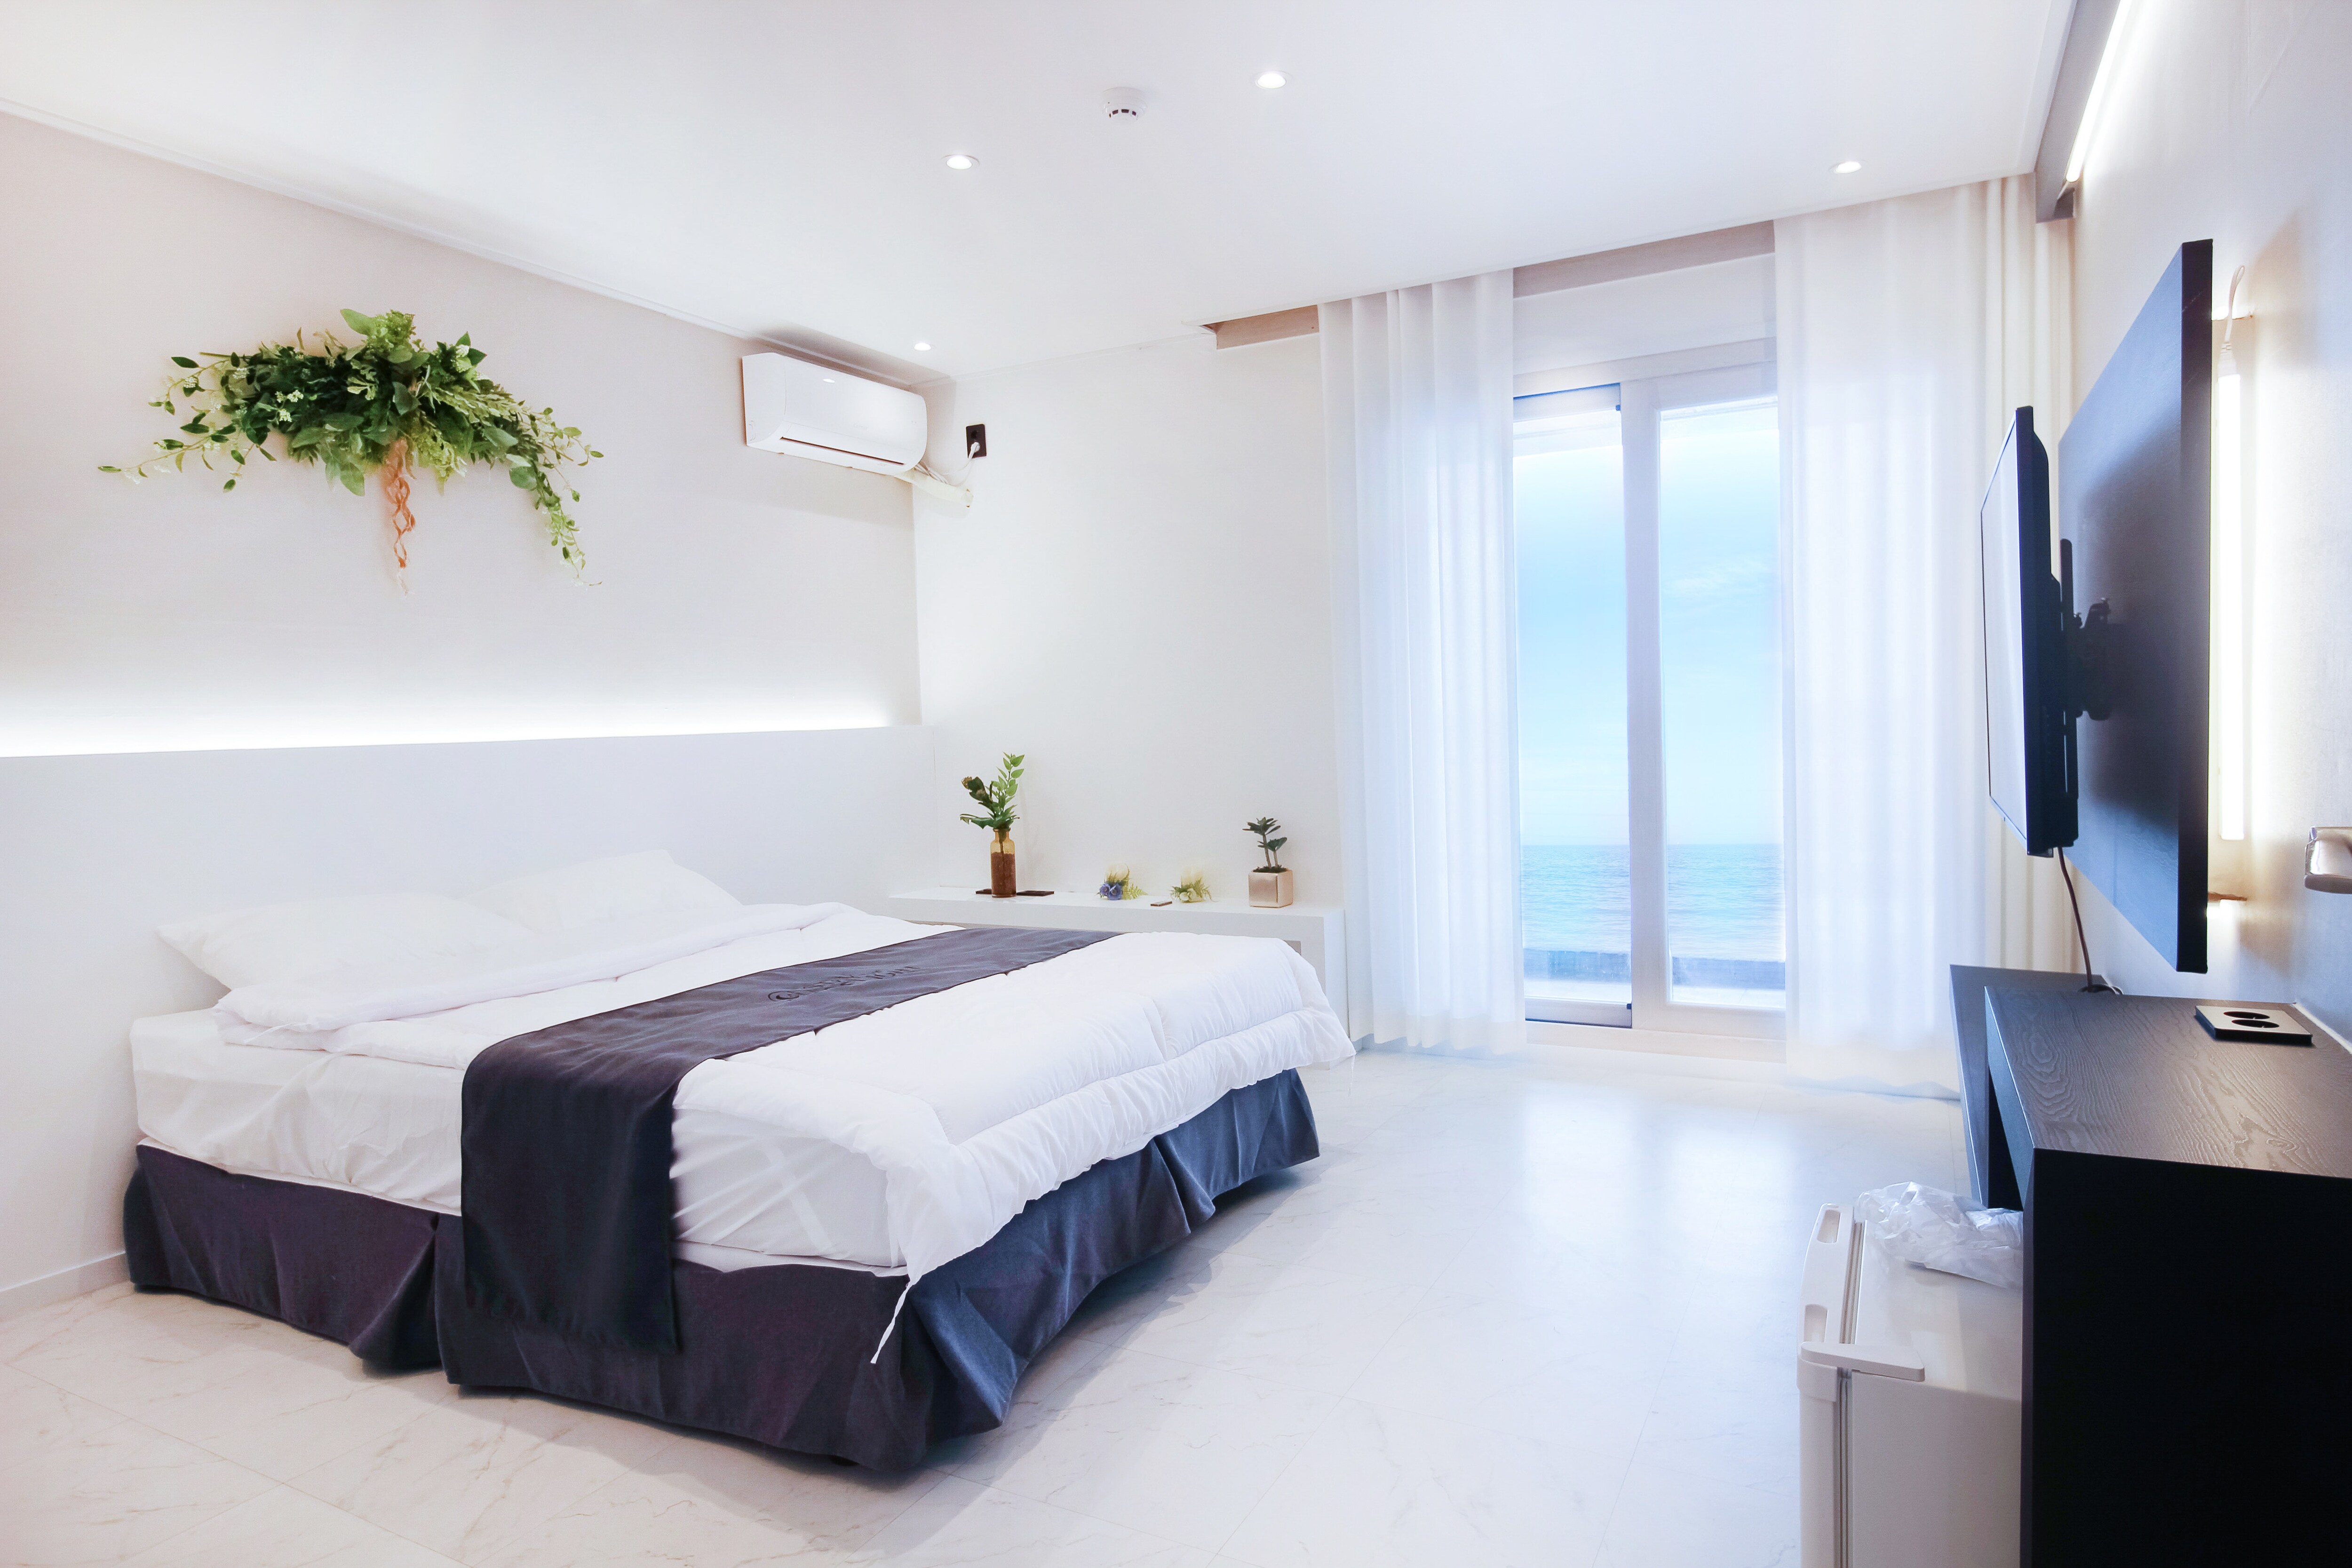 Property Image 1 - Fresh Cheerful Apartment with Ocean Views 2